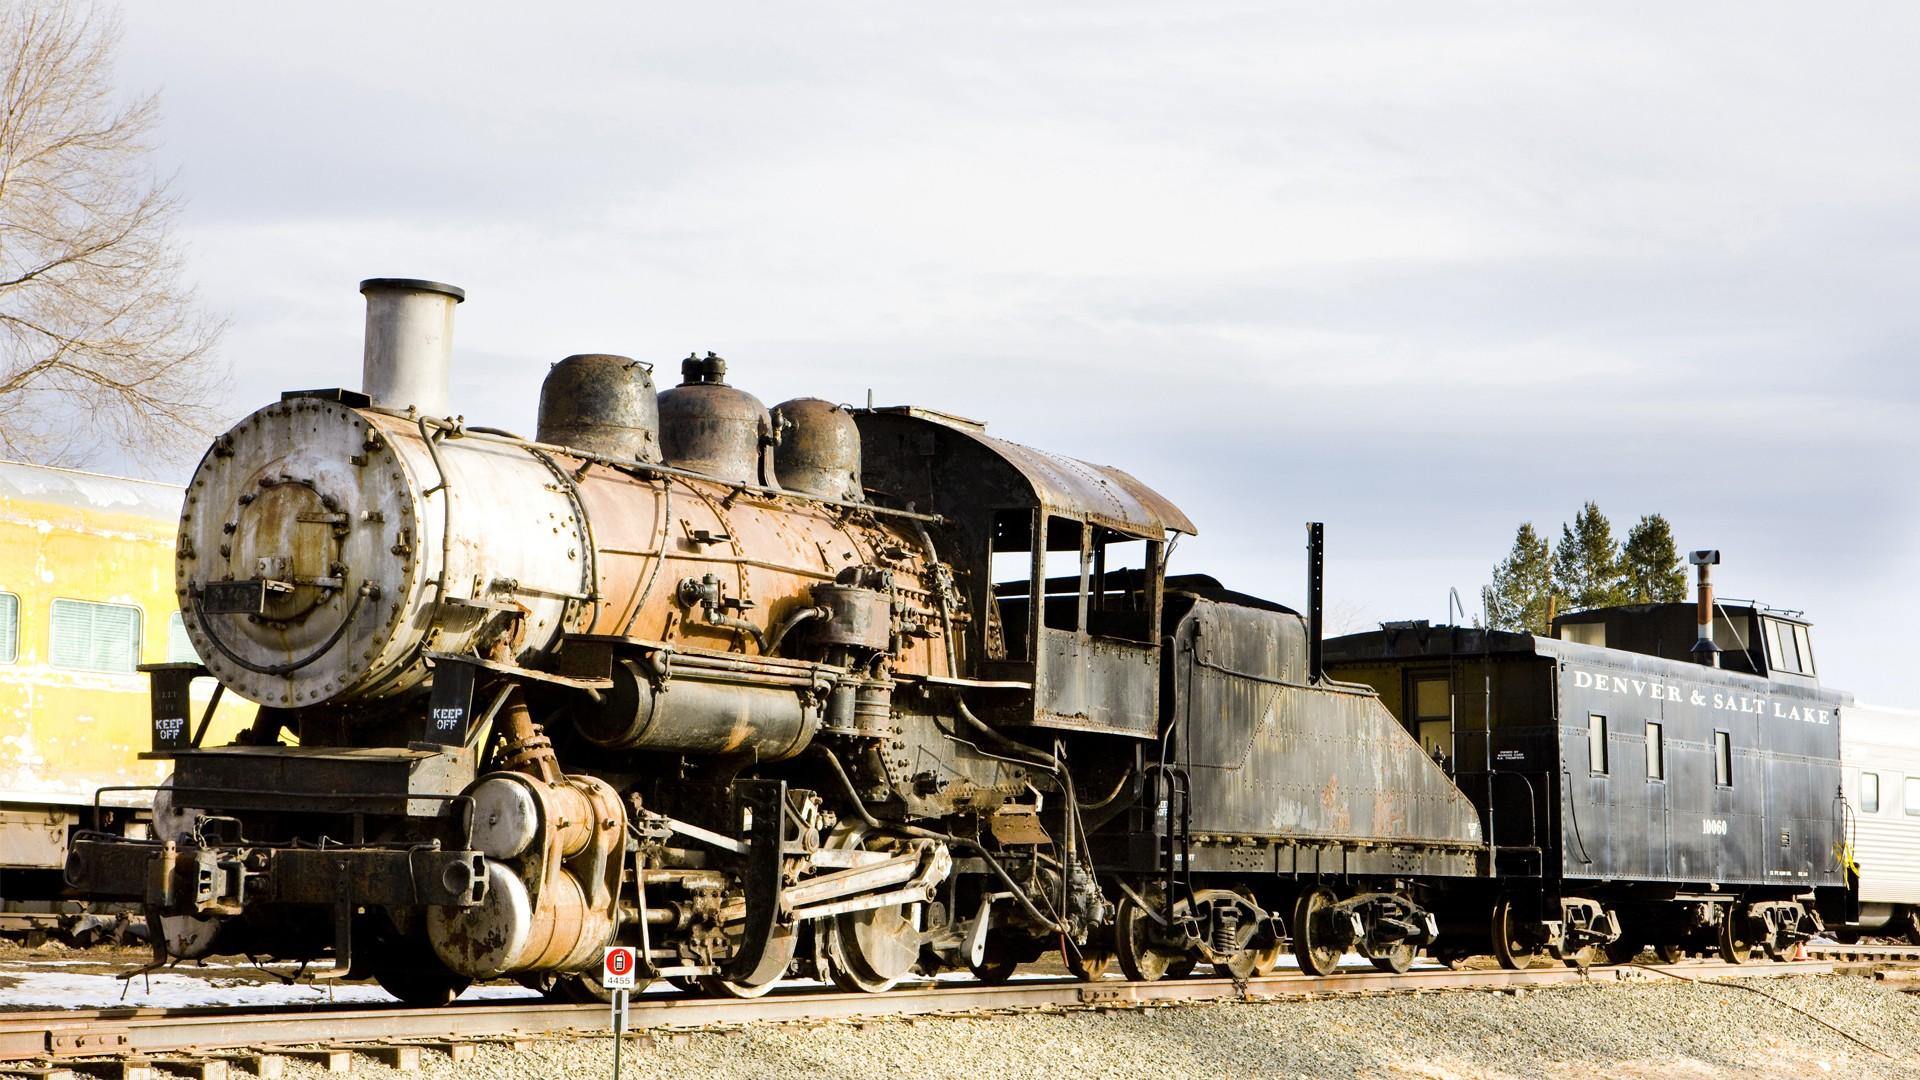 Old Steam Engine Photos HD Wallpaper Image Pictures